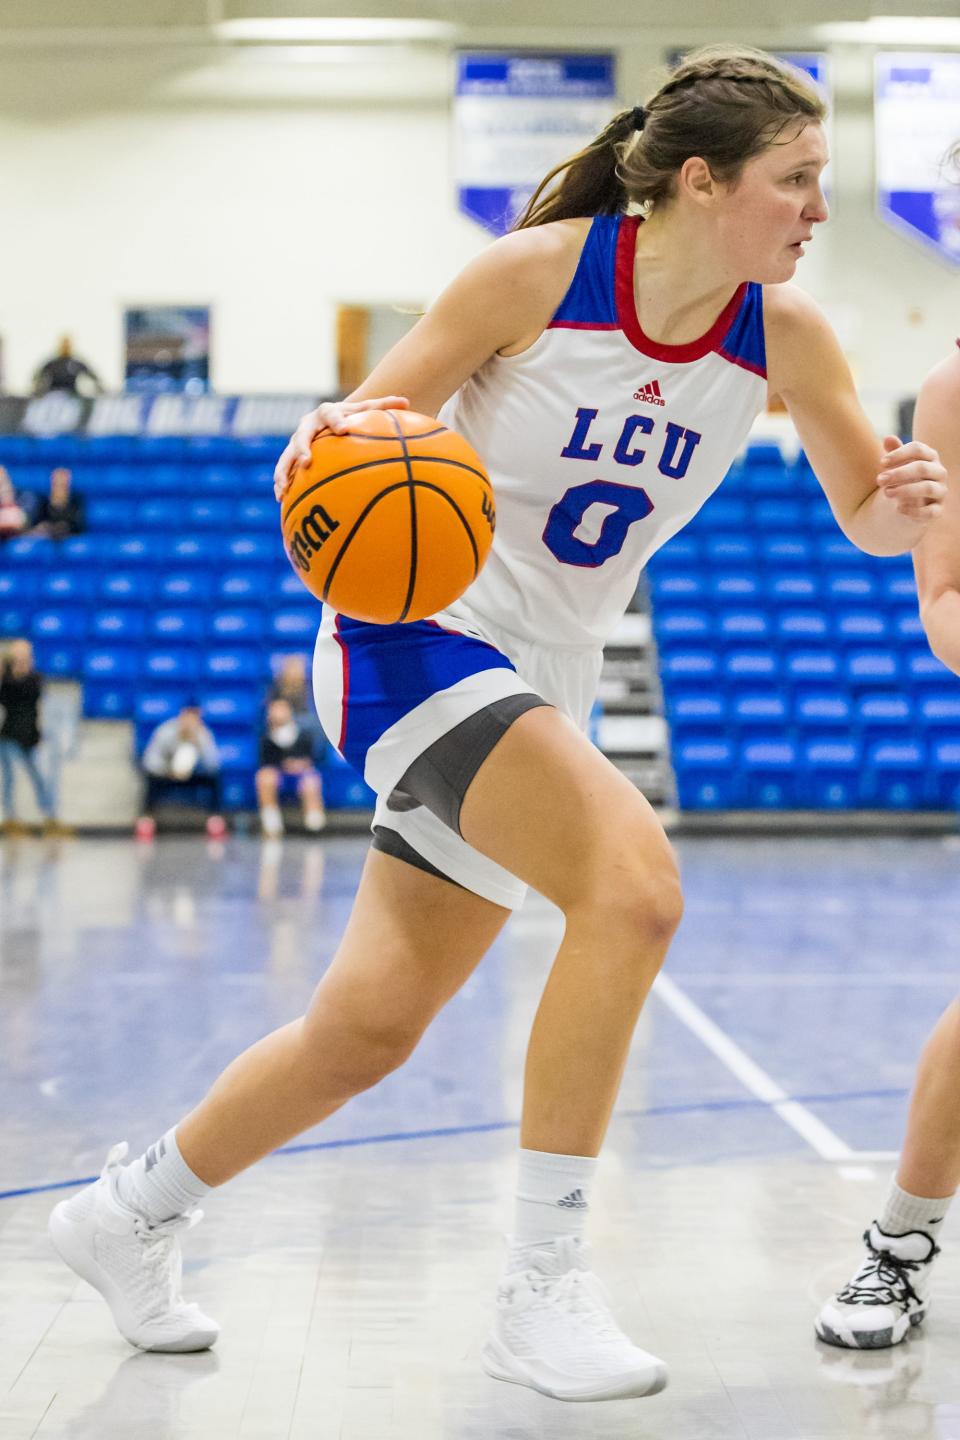 Lubbock Christian University forward Grace Foster (0) was named the Lone Star Conference women's basketball player of the year in voting by the LSC head coaches. Foster was the conference's fourth-leading scorer and second-leading rebounder during the regular season.